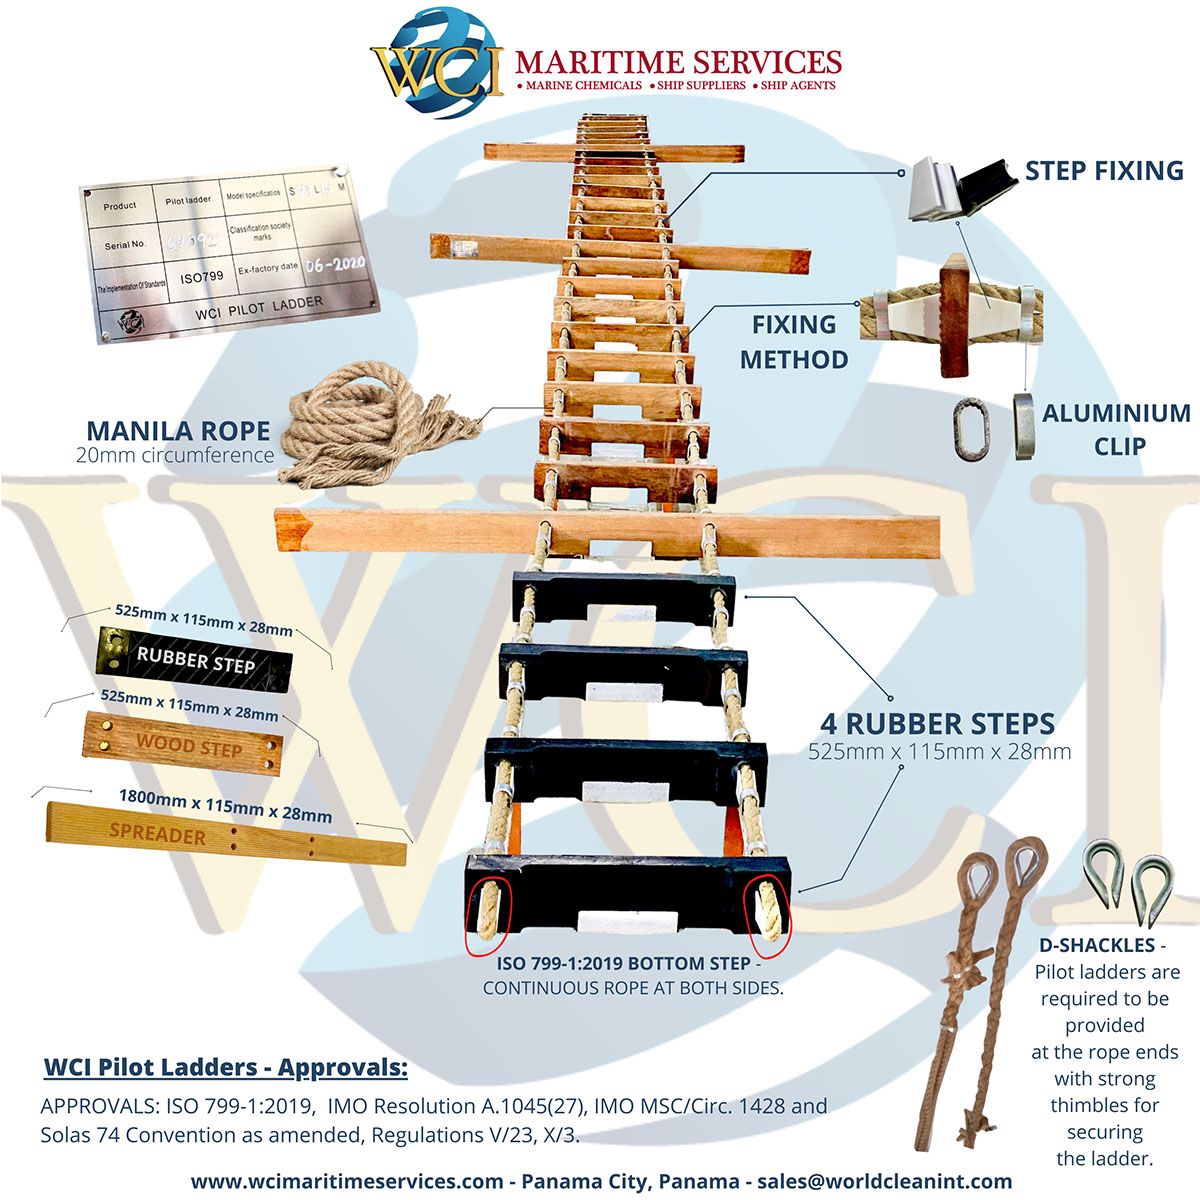 Services and Ship Supplies